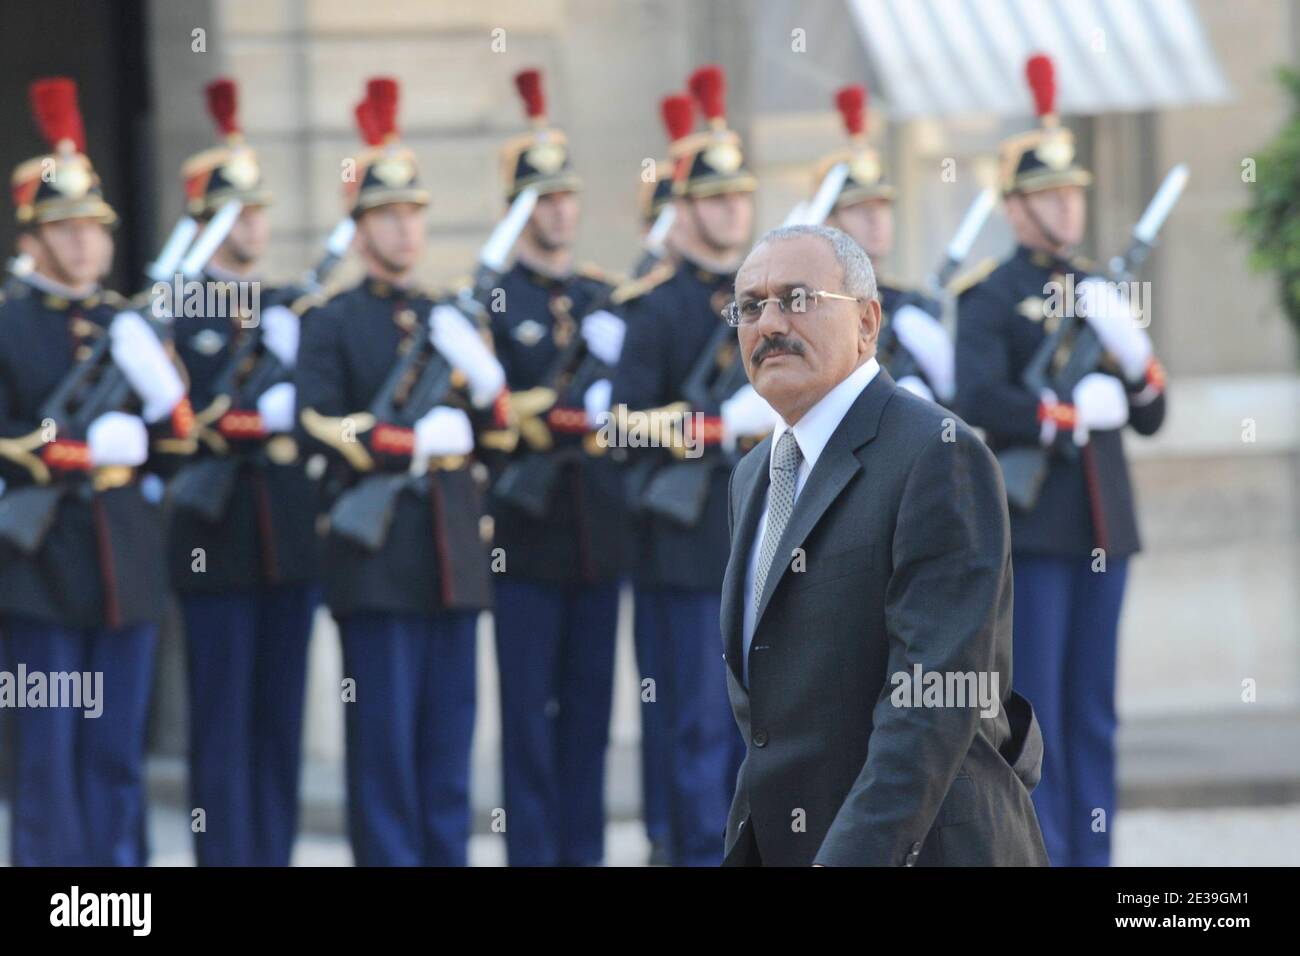 Yemen President, Ali Abdullah Saleh arrives at Elysee Palace to a meeting in Paris, France on October 12, 2010. Photo by Ammar Abd Rabbo/ABACAPRESS.COM Stock Photo